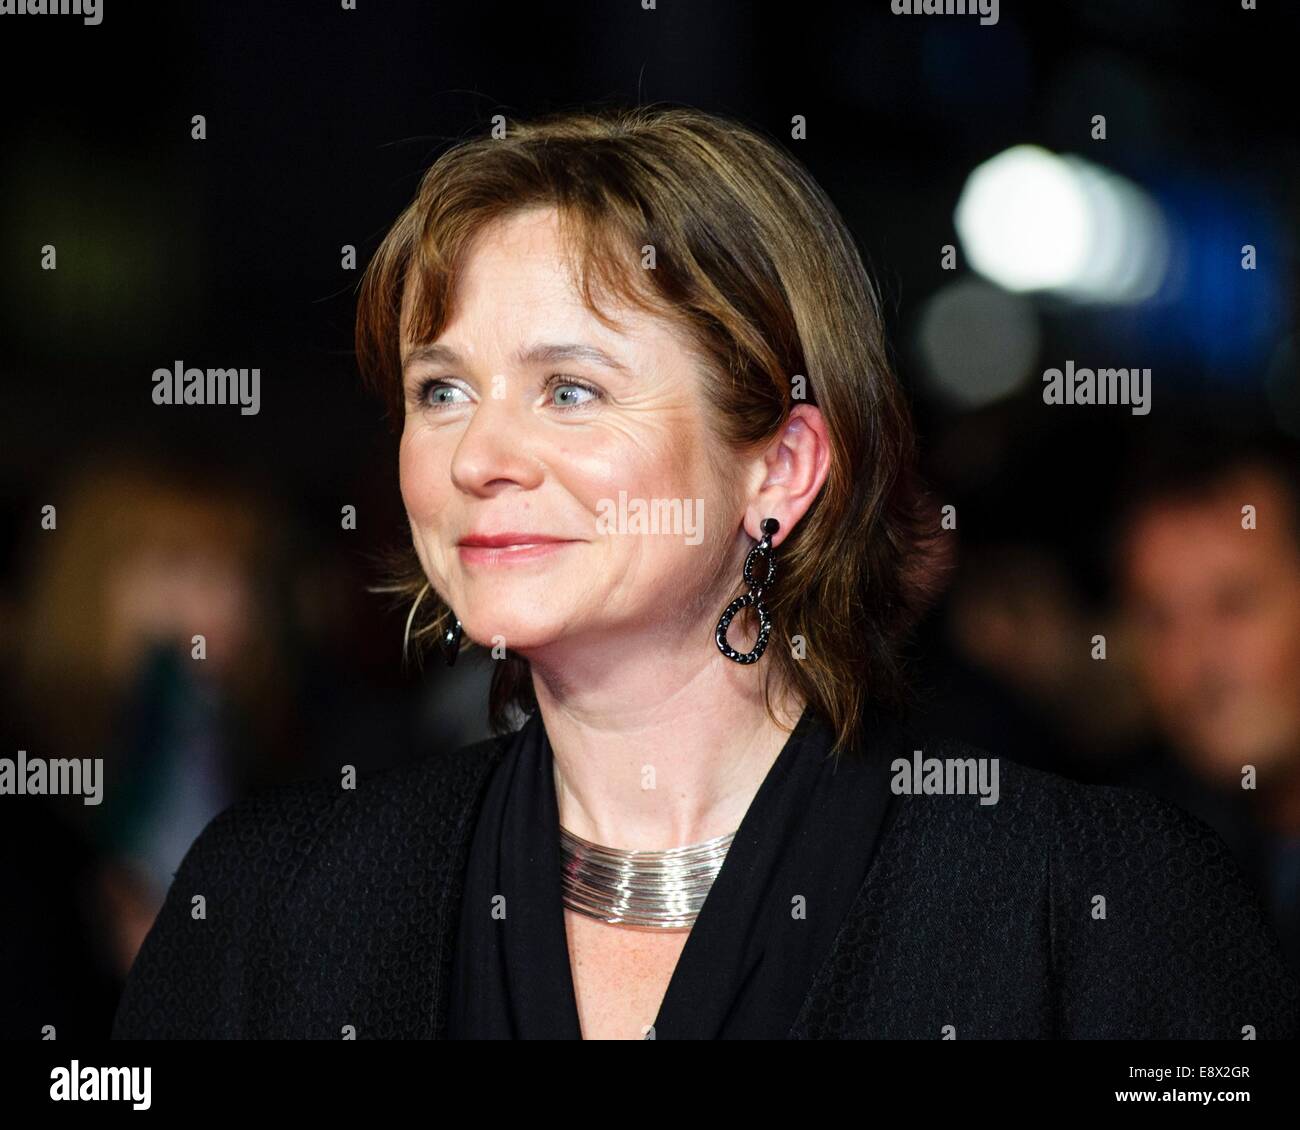 Pictures of emily watson